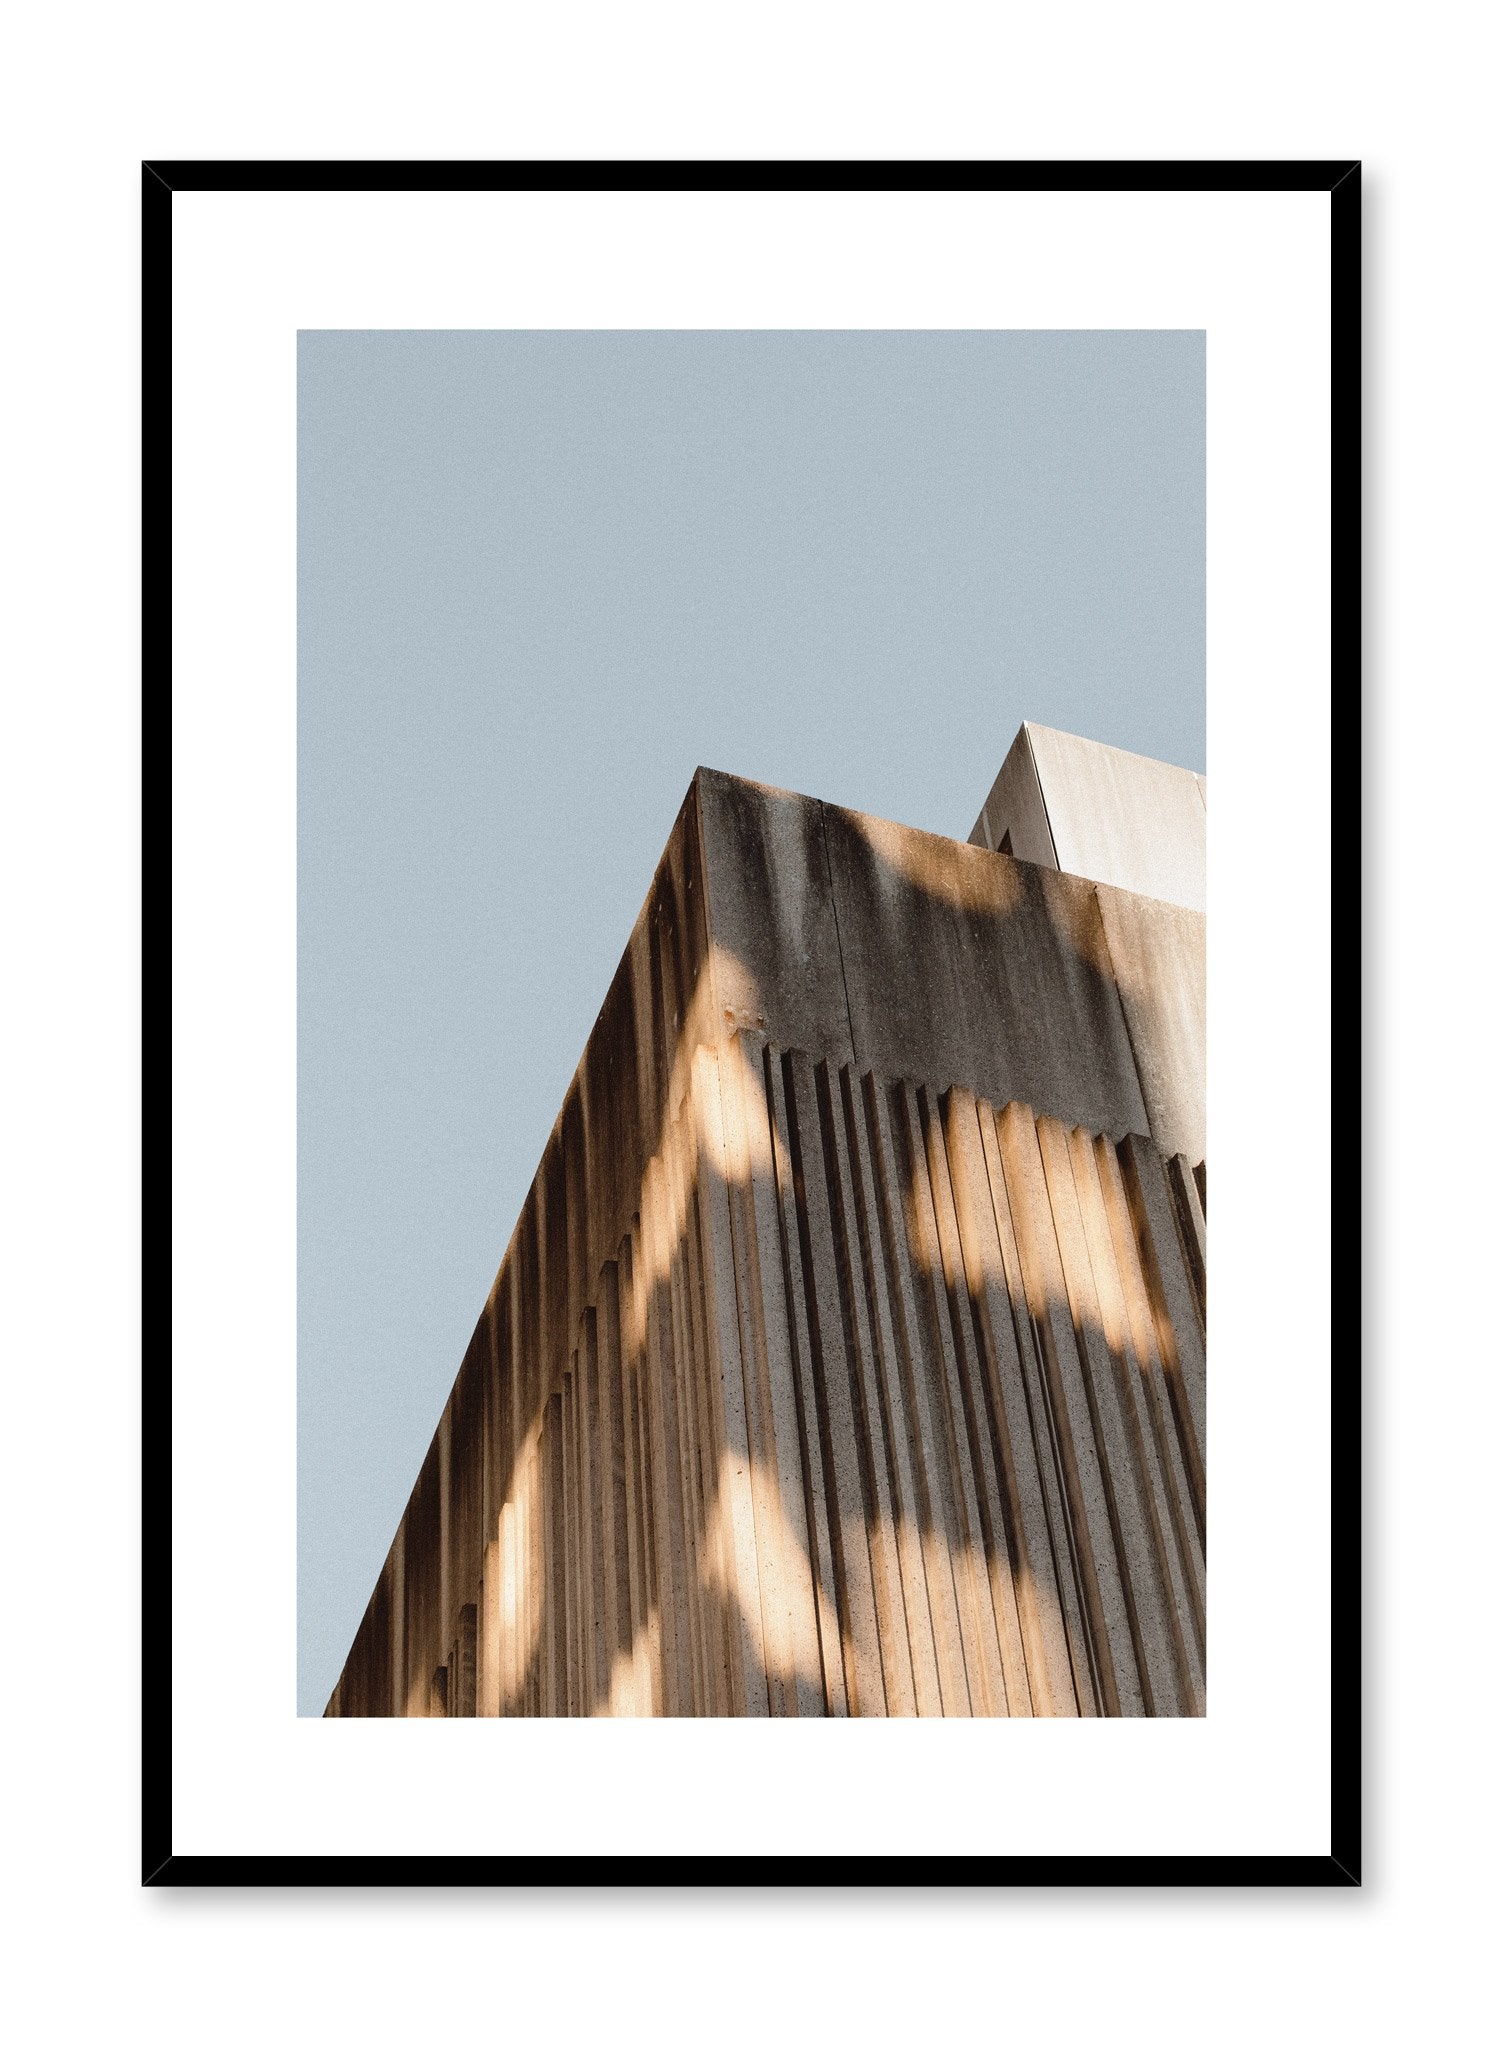 Modern minimalist poster by Opposite Wall with photography of corner of building